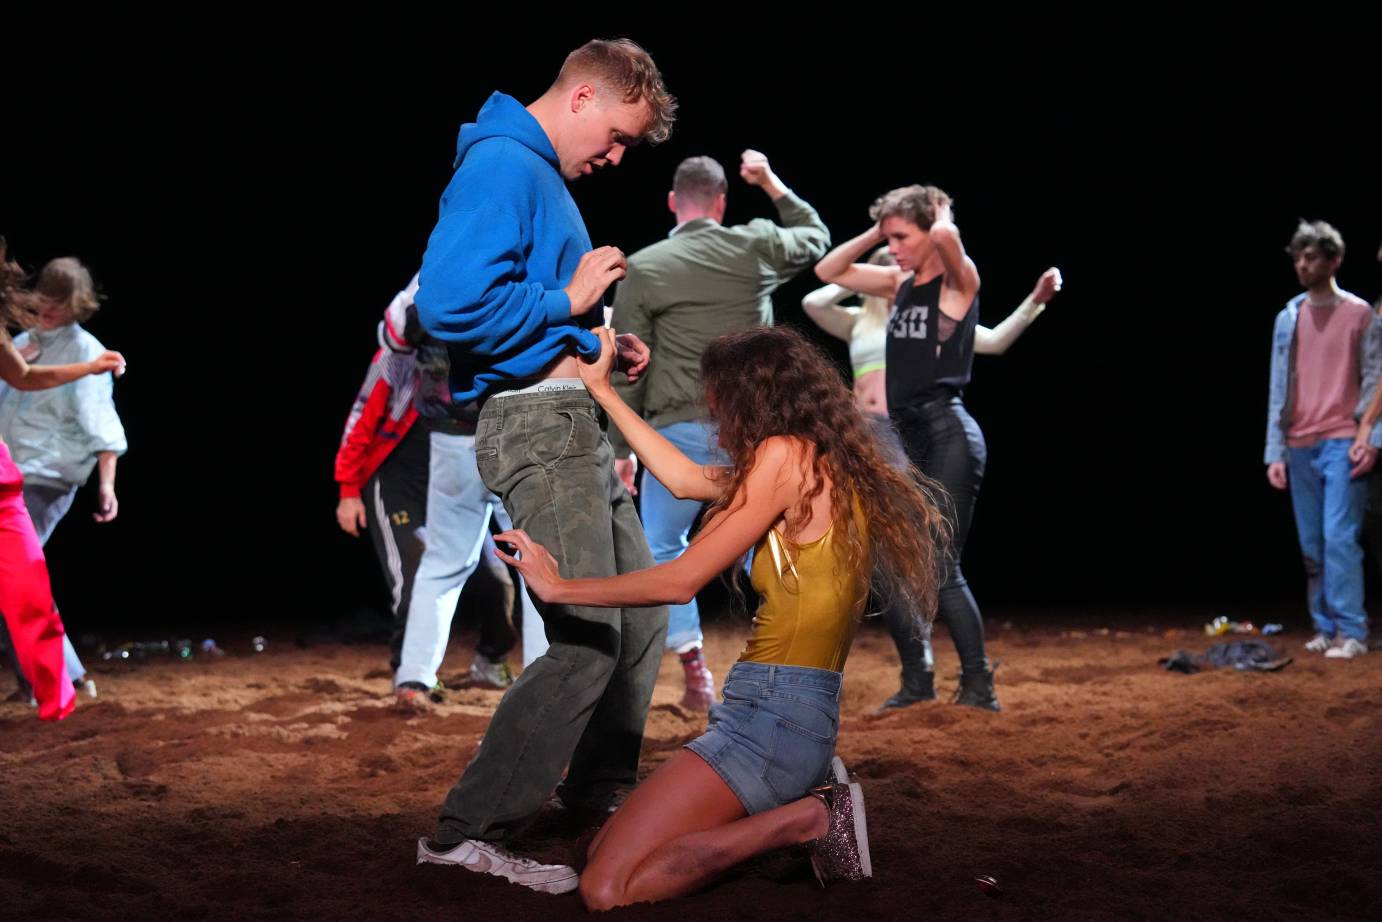 a woman in a golden leotard and jean hot pants kneels in the dirt pulling at the jeans of a man who stands above her looking wasted